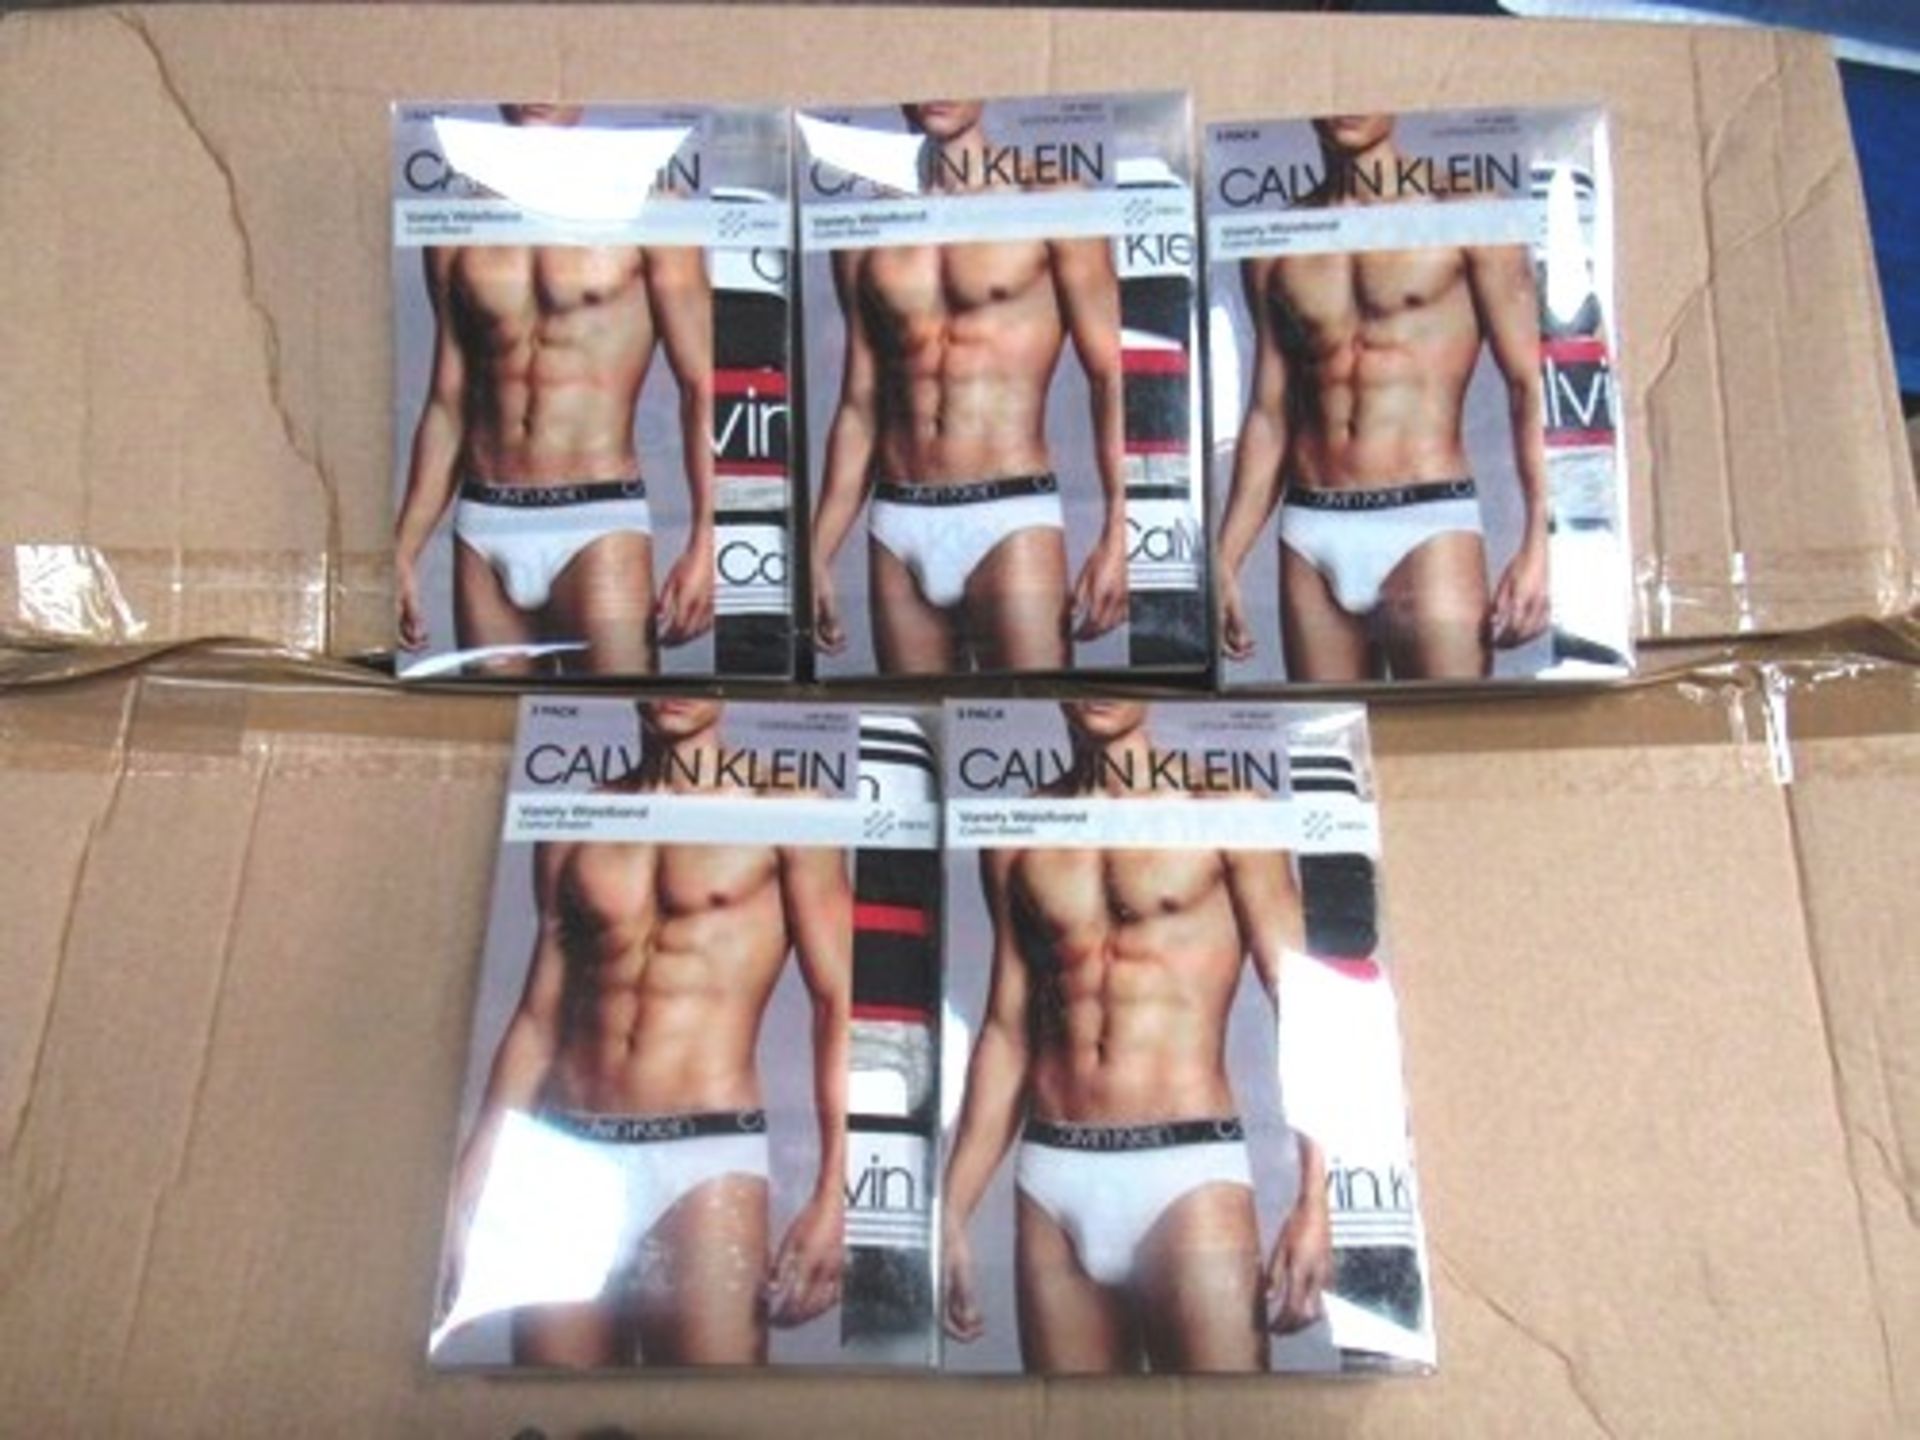 5 x boxes each containing 3 pack Calvin Klein hip briefs, size L - Sealed new in pack (ES15B)